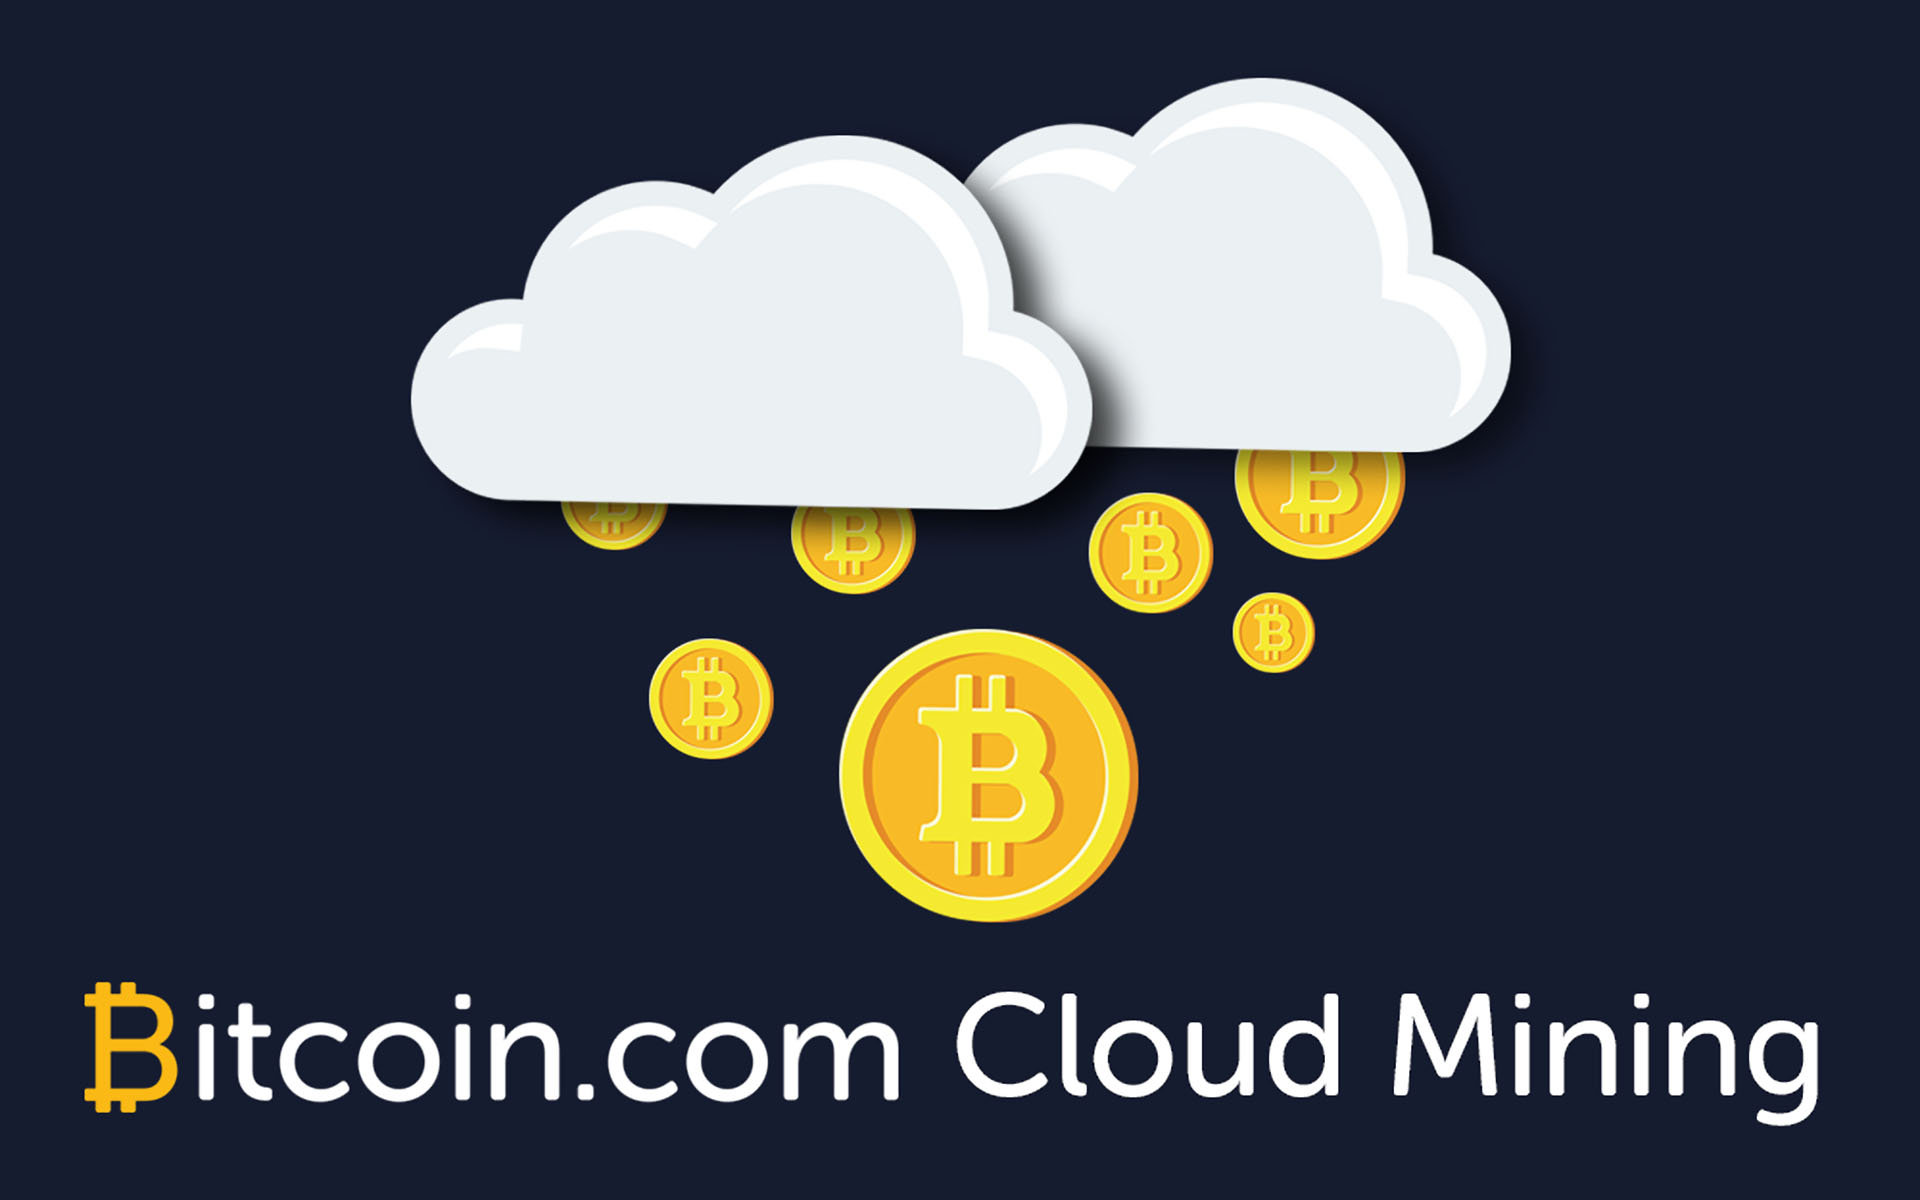 Bitcoin.com Partners with North America's Largest Mining Farm, Adds World Class Cloud Mining to Offerings